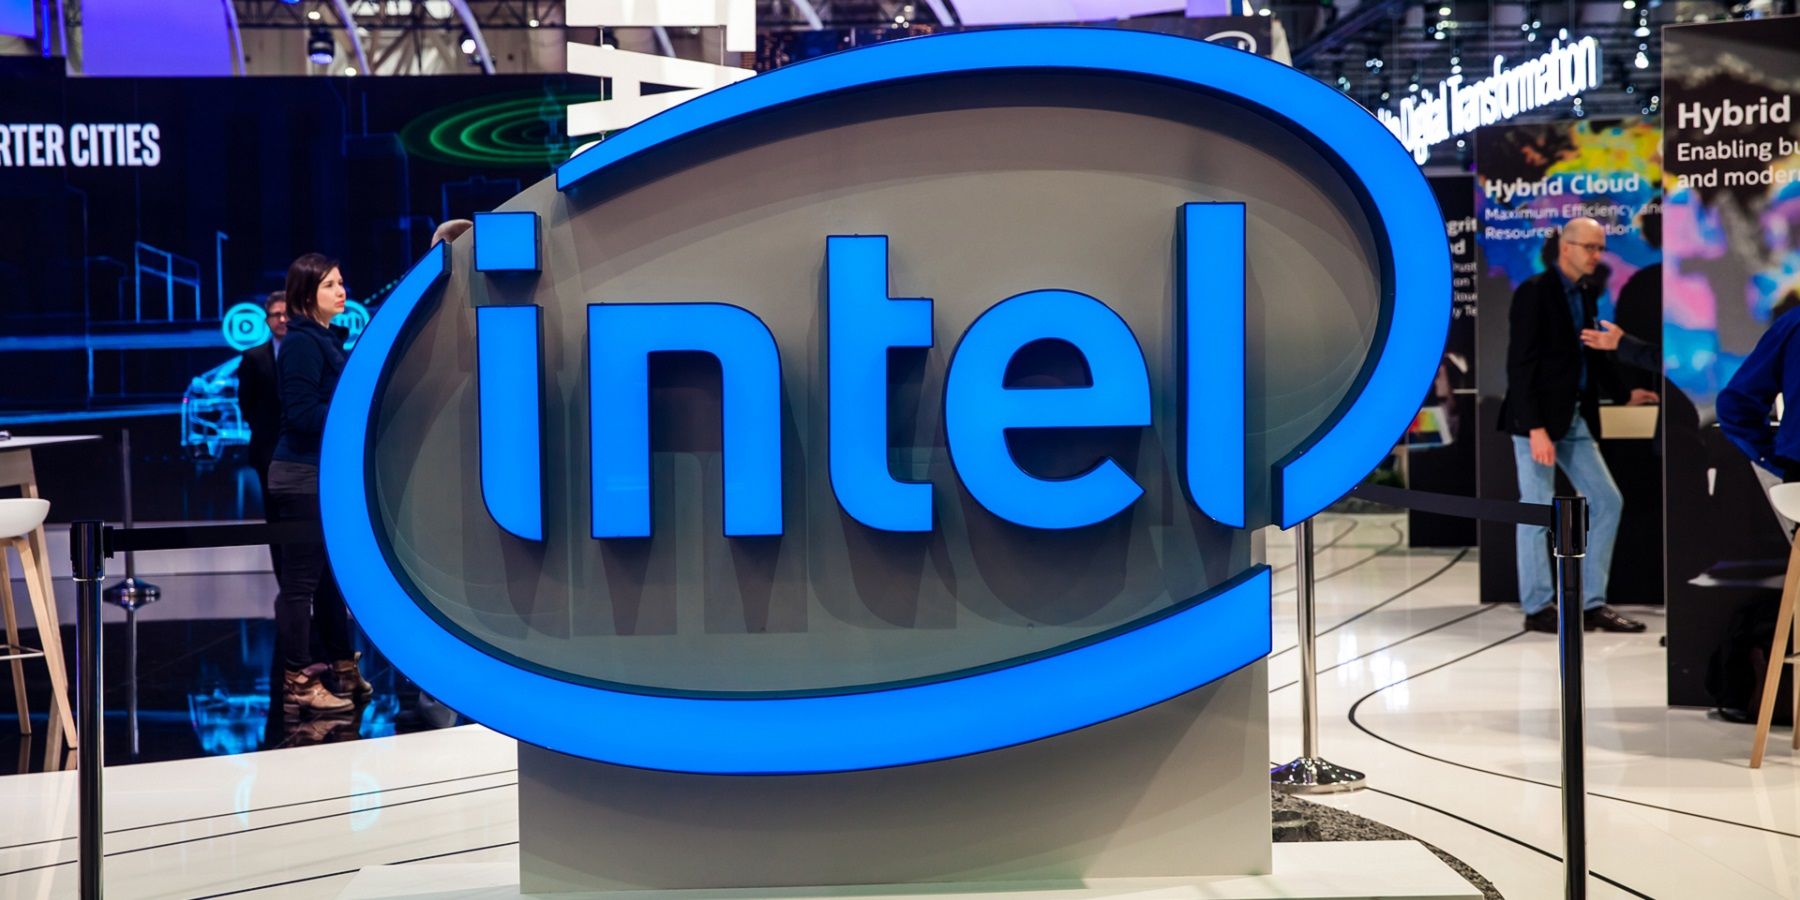 Photo of the Intel logo in the foreground of a convention.